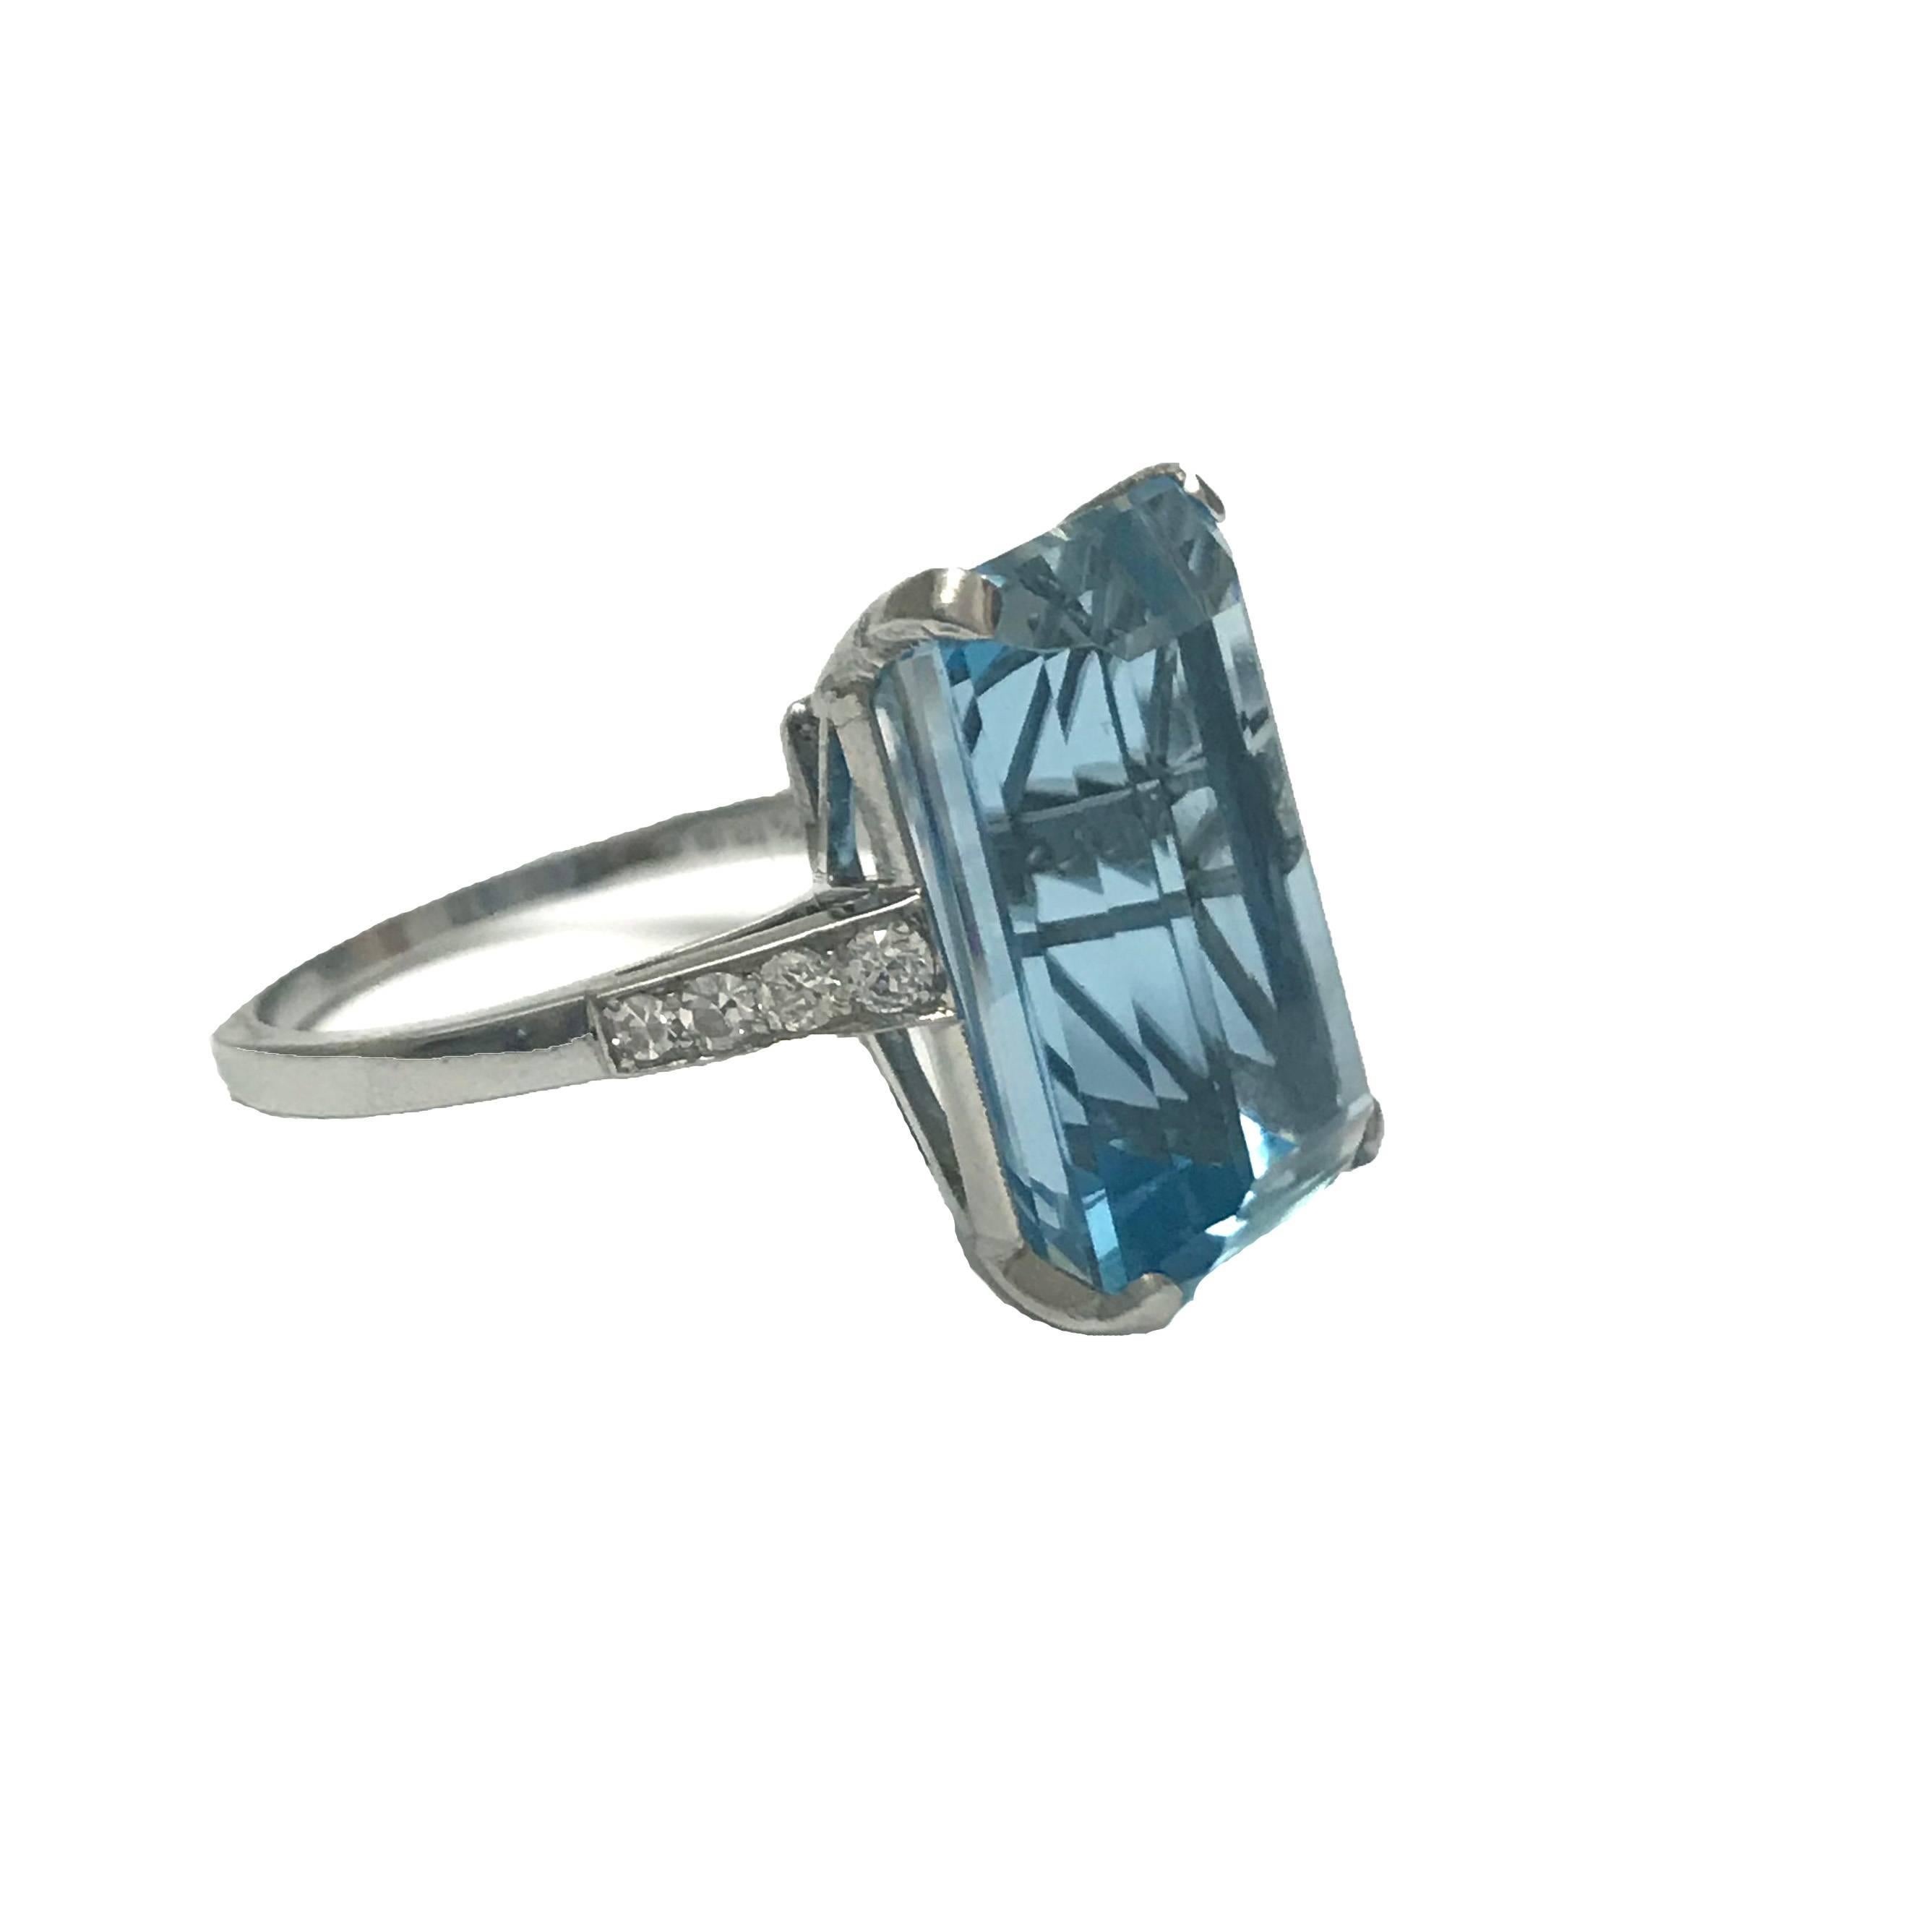 Thanks to Prince Harry & Meghan Markle Aquamarine cocktail rings have made a resurgence onto the jewellery market. This ring has an exceptional emerald cut aquamarine weighing approximately 11.20ct mounted with diamond accents in a beautiful,